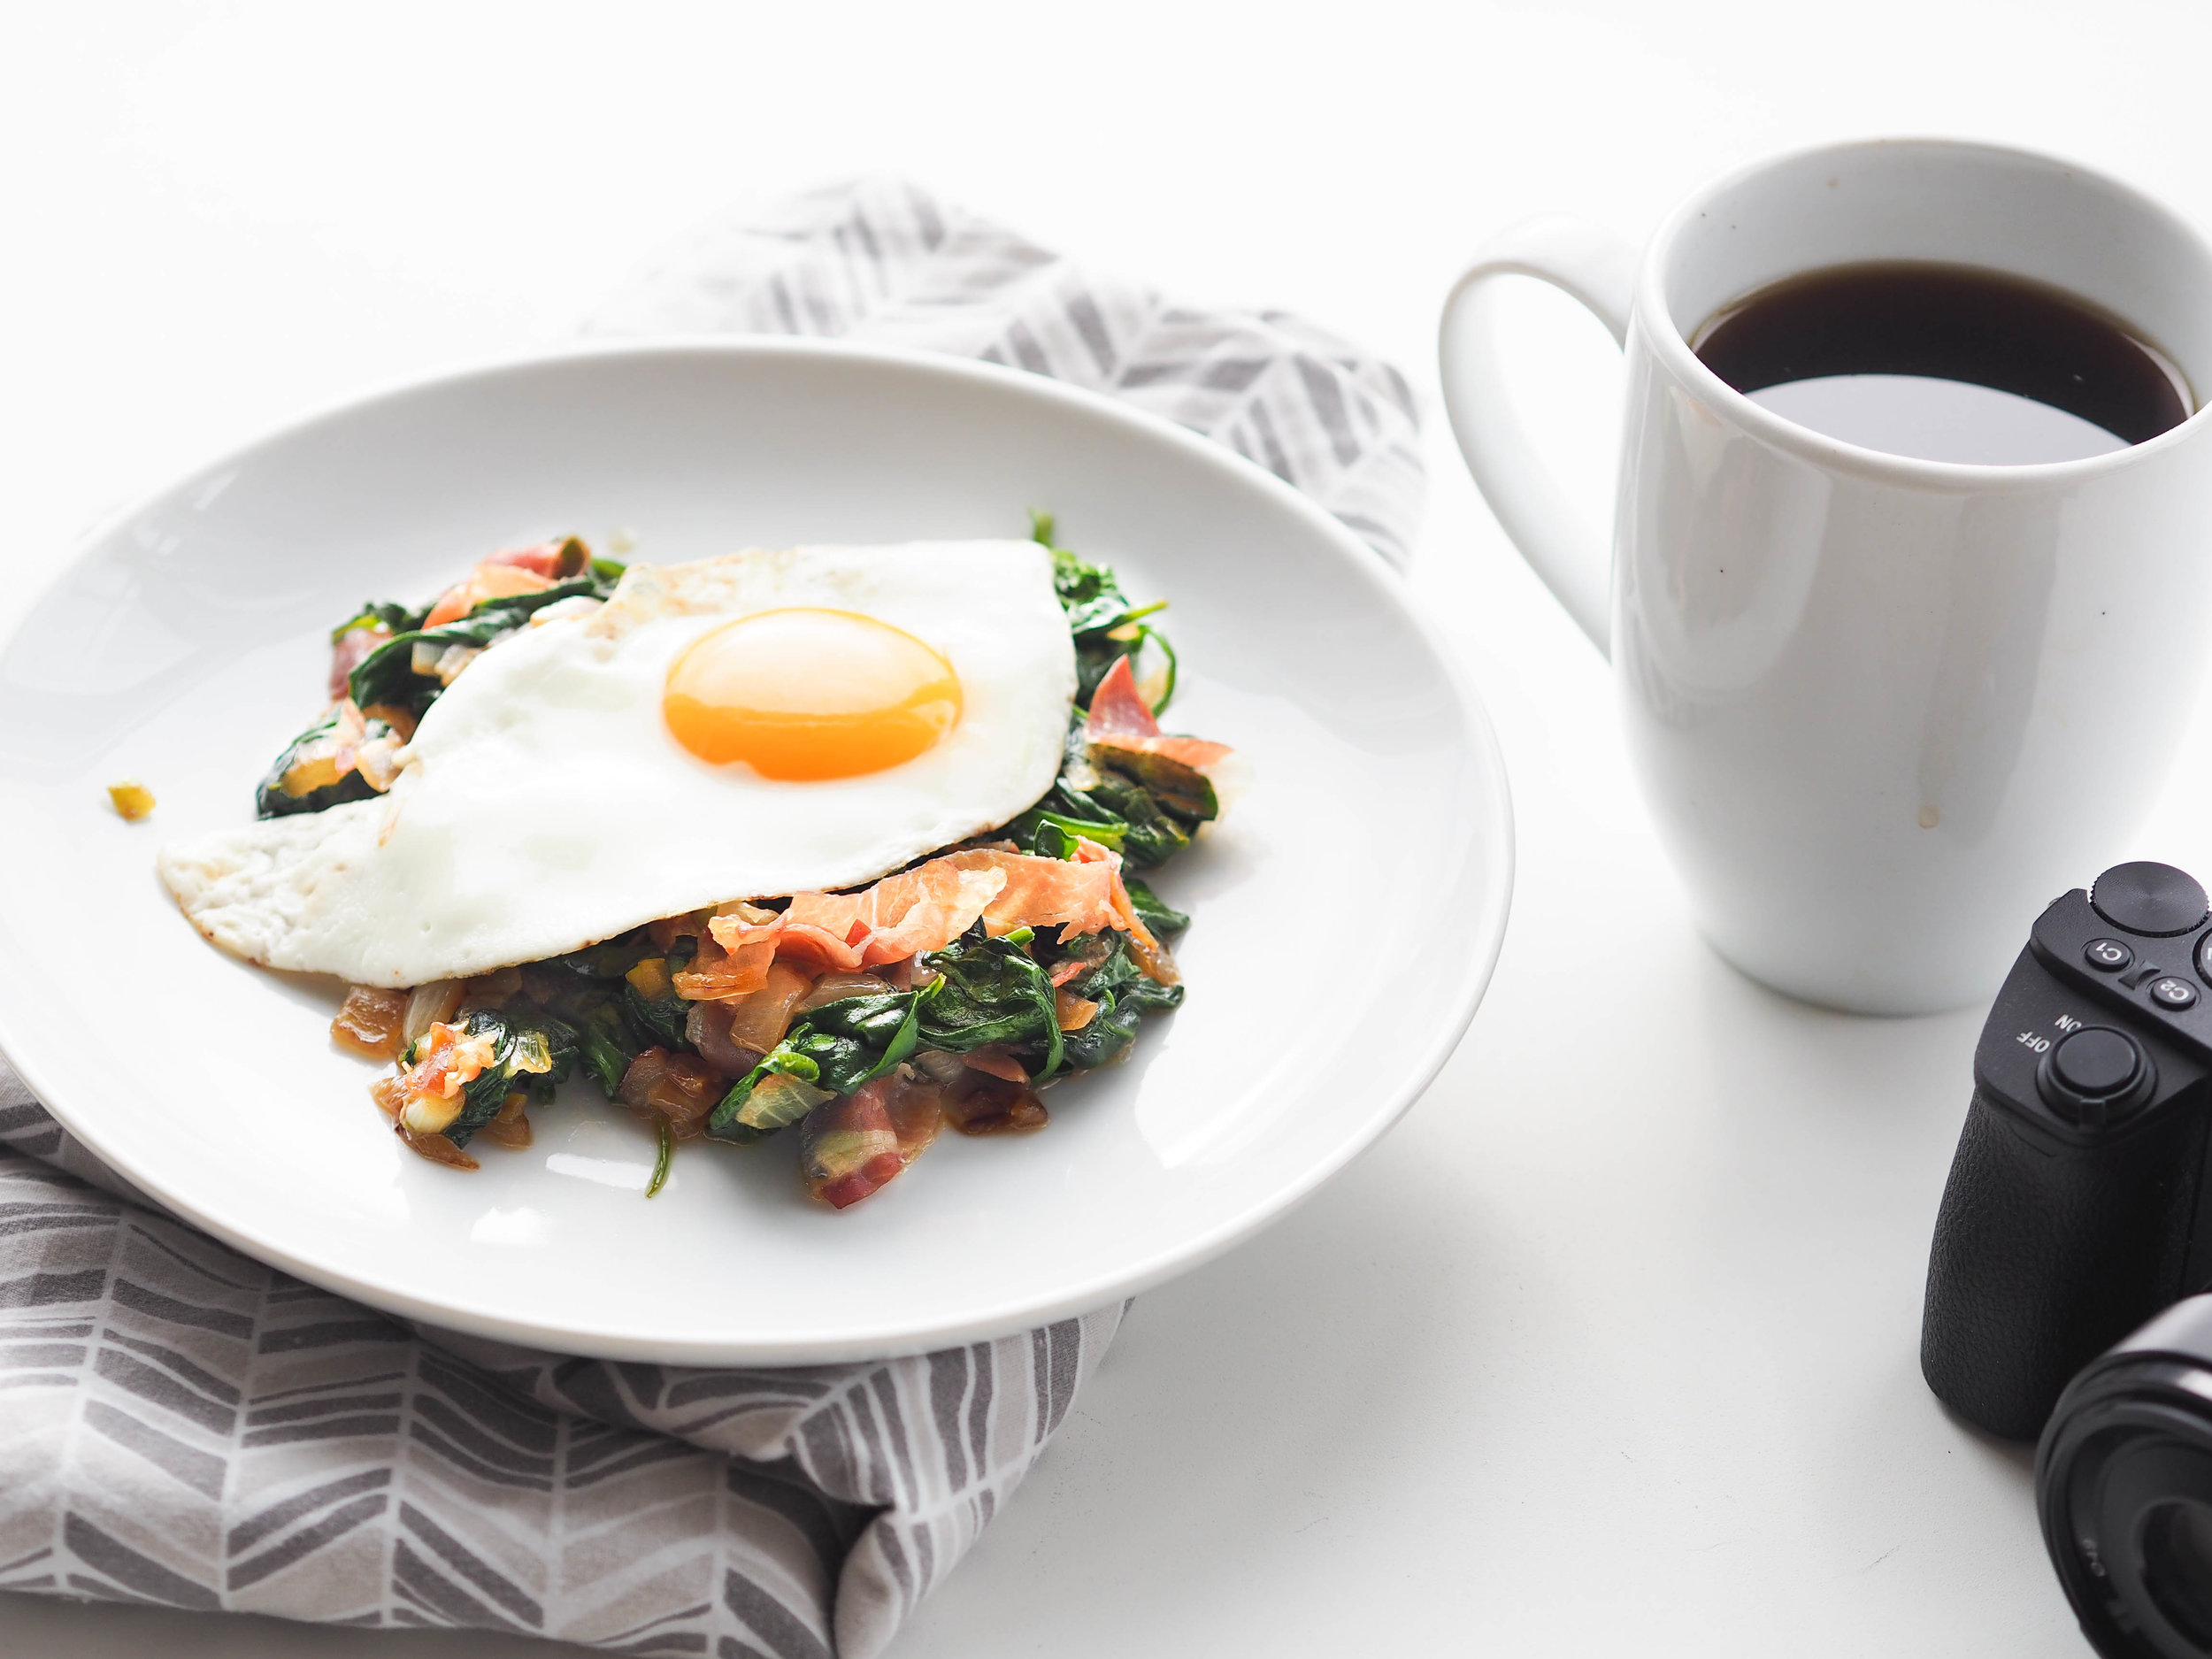 Sauteed Spinach and A Sunny Egg